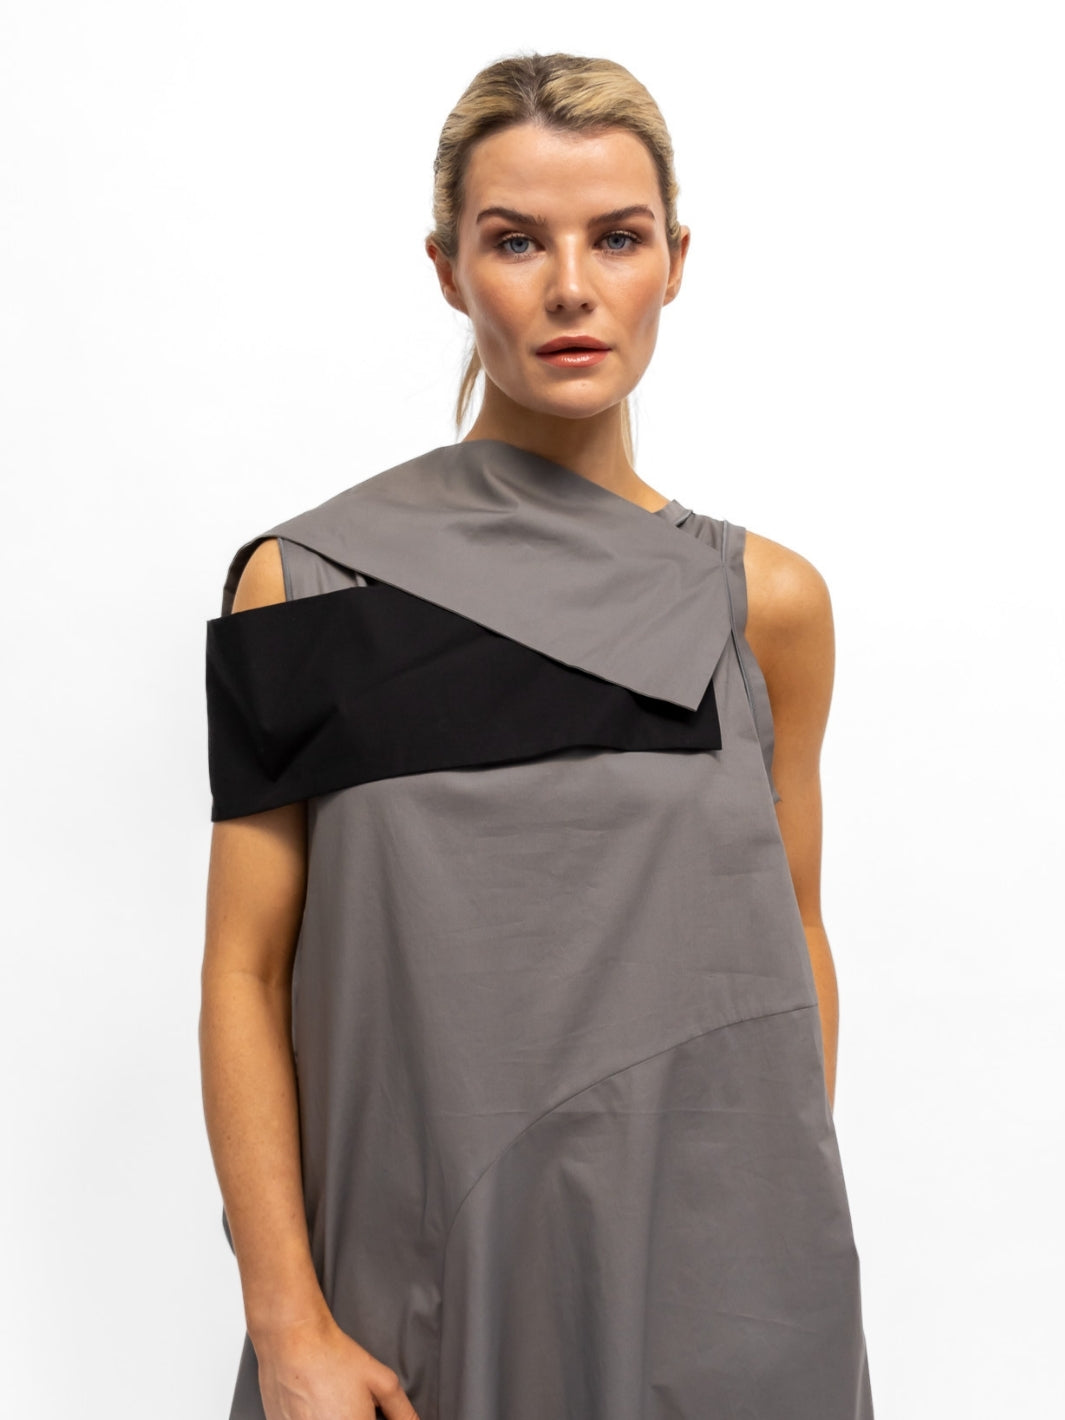 Xenia Design Dress Xenia ELAN Dress in Soft Taupe and Black